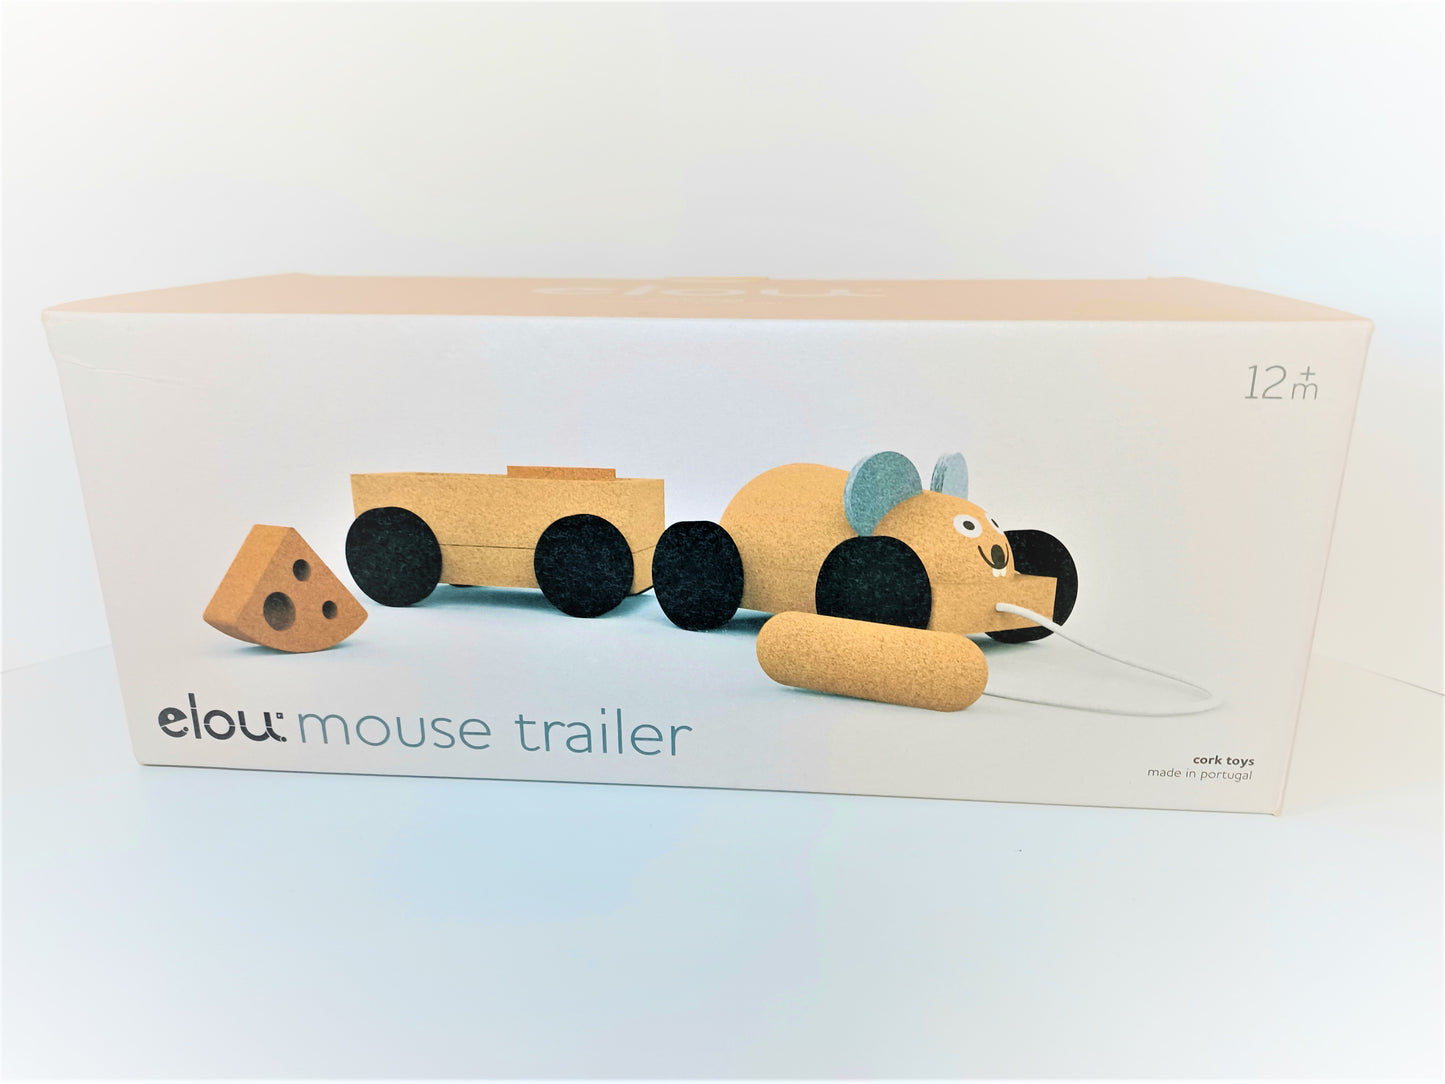 Elou Mouse and Trailer